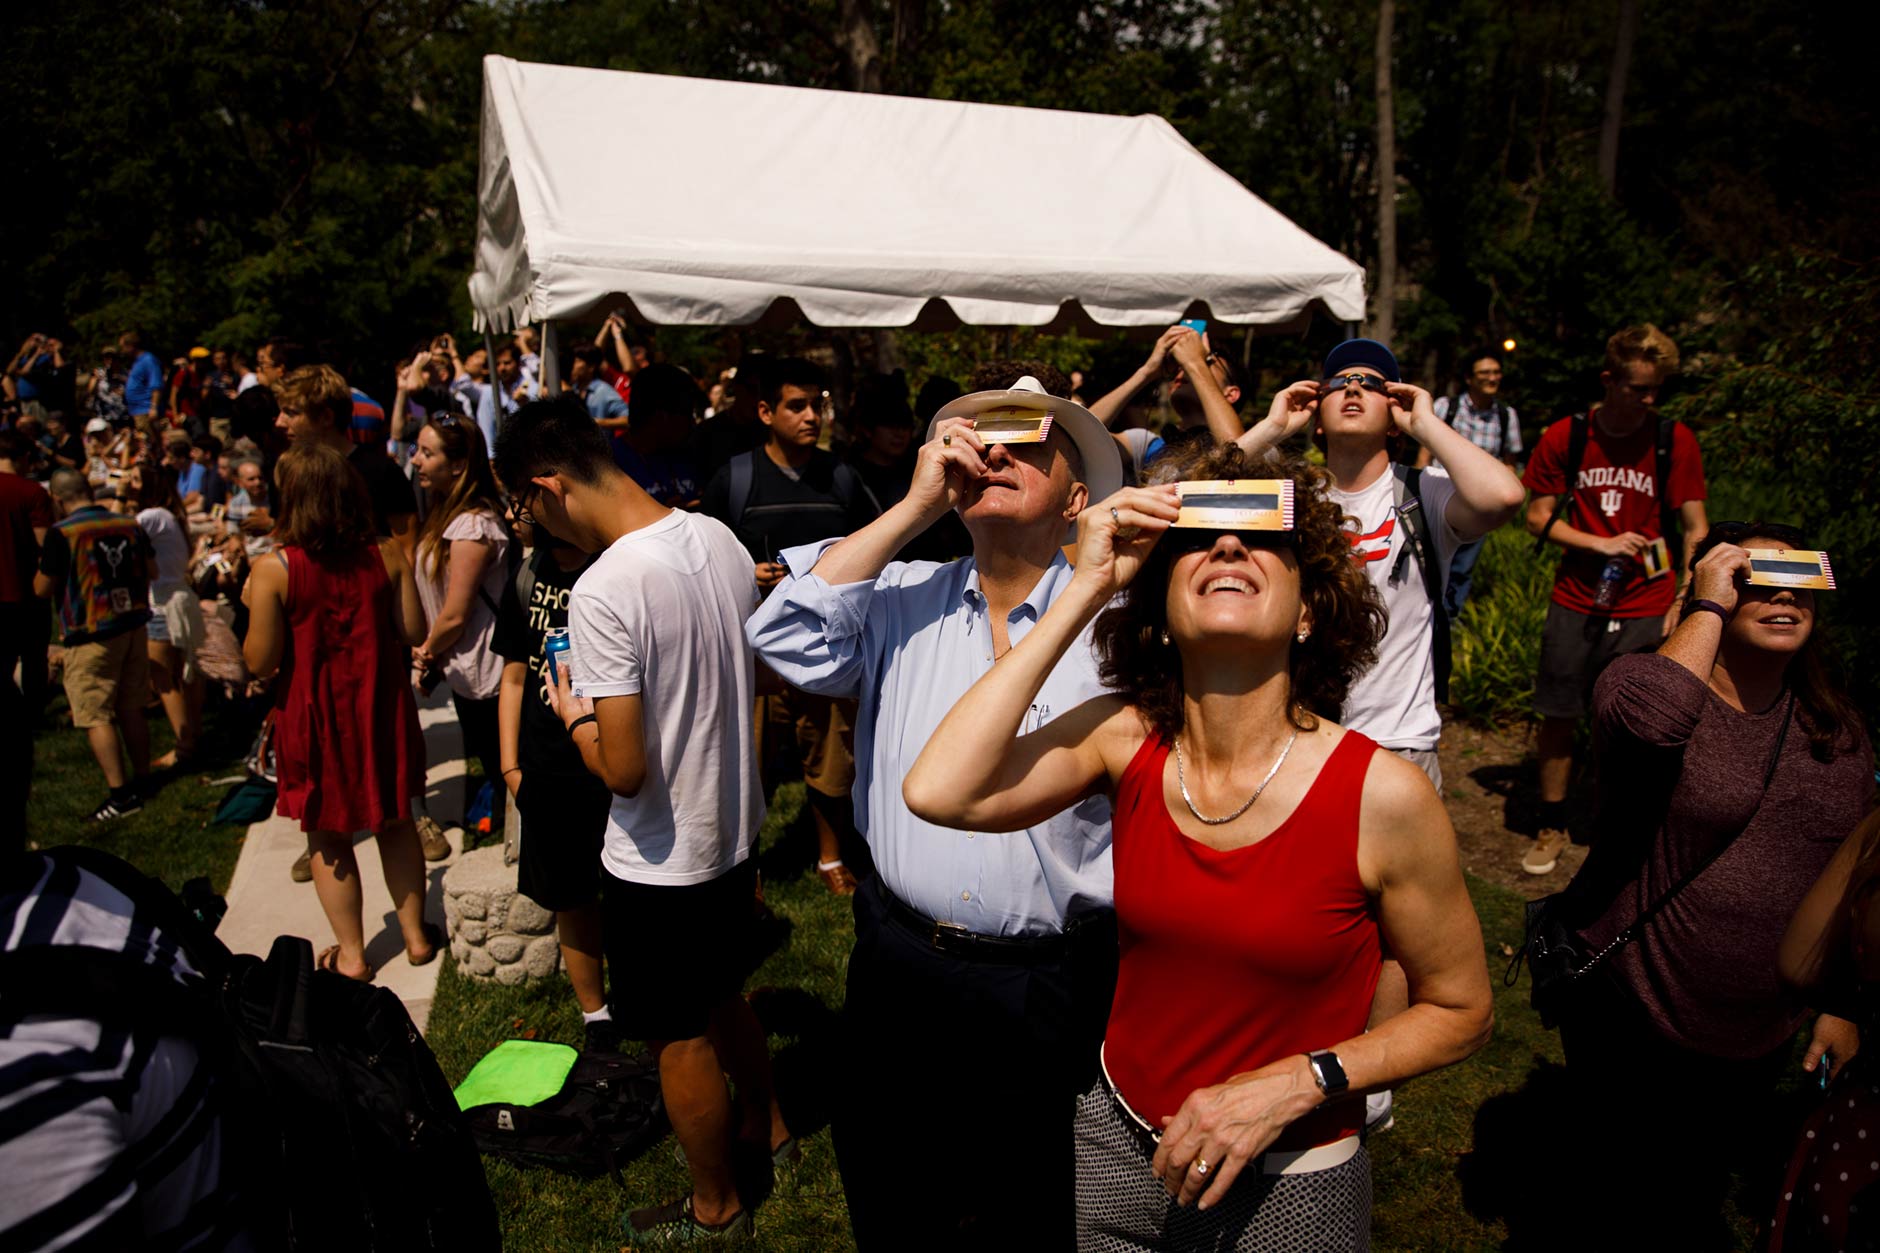 Indiana University Bloomington Eclipse Viewing Party